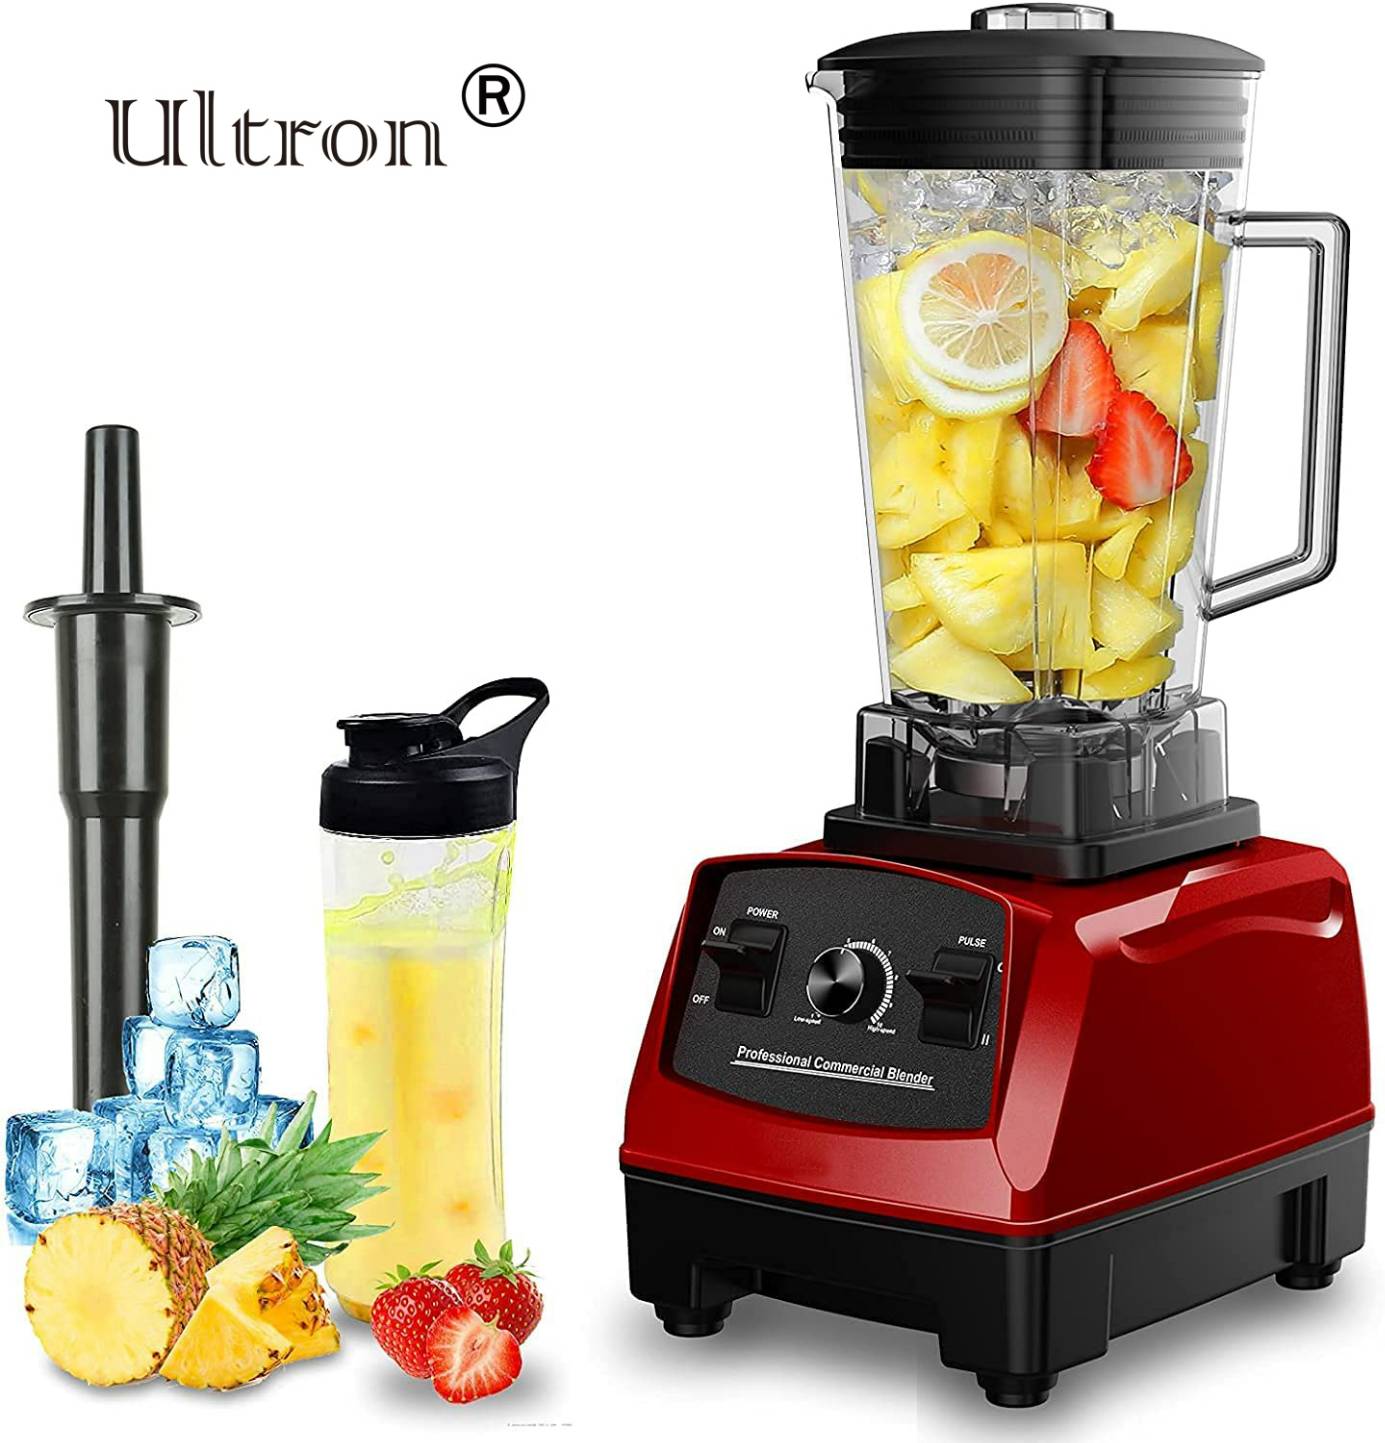 Ultron 1500 Watt Powerful Professional Smoothie Blender, Countertop Blender with BPA-FREE 70oz Pitcher and Self-Cleaning, Food blender for Commercial and Home 